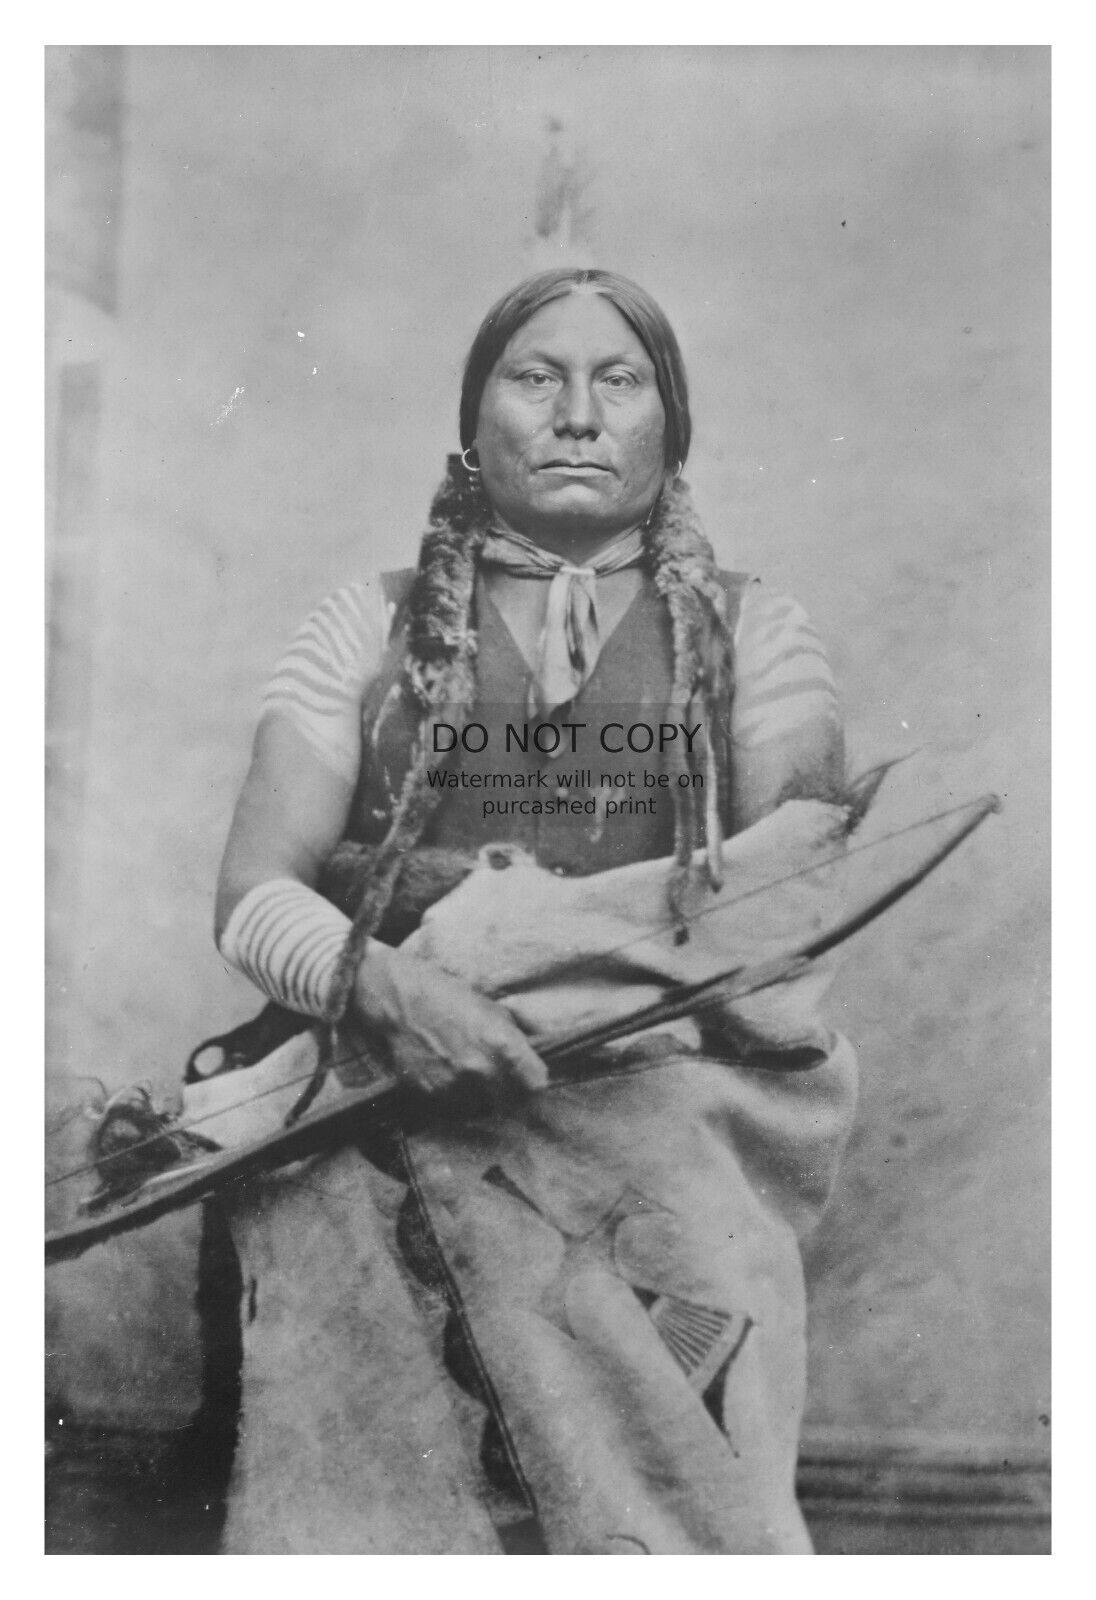 CHIEF GALL NATIVE AMERICAN CHEIF SURVIVOR OF CUSTERS LAST STAND 4X6 PHOTO